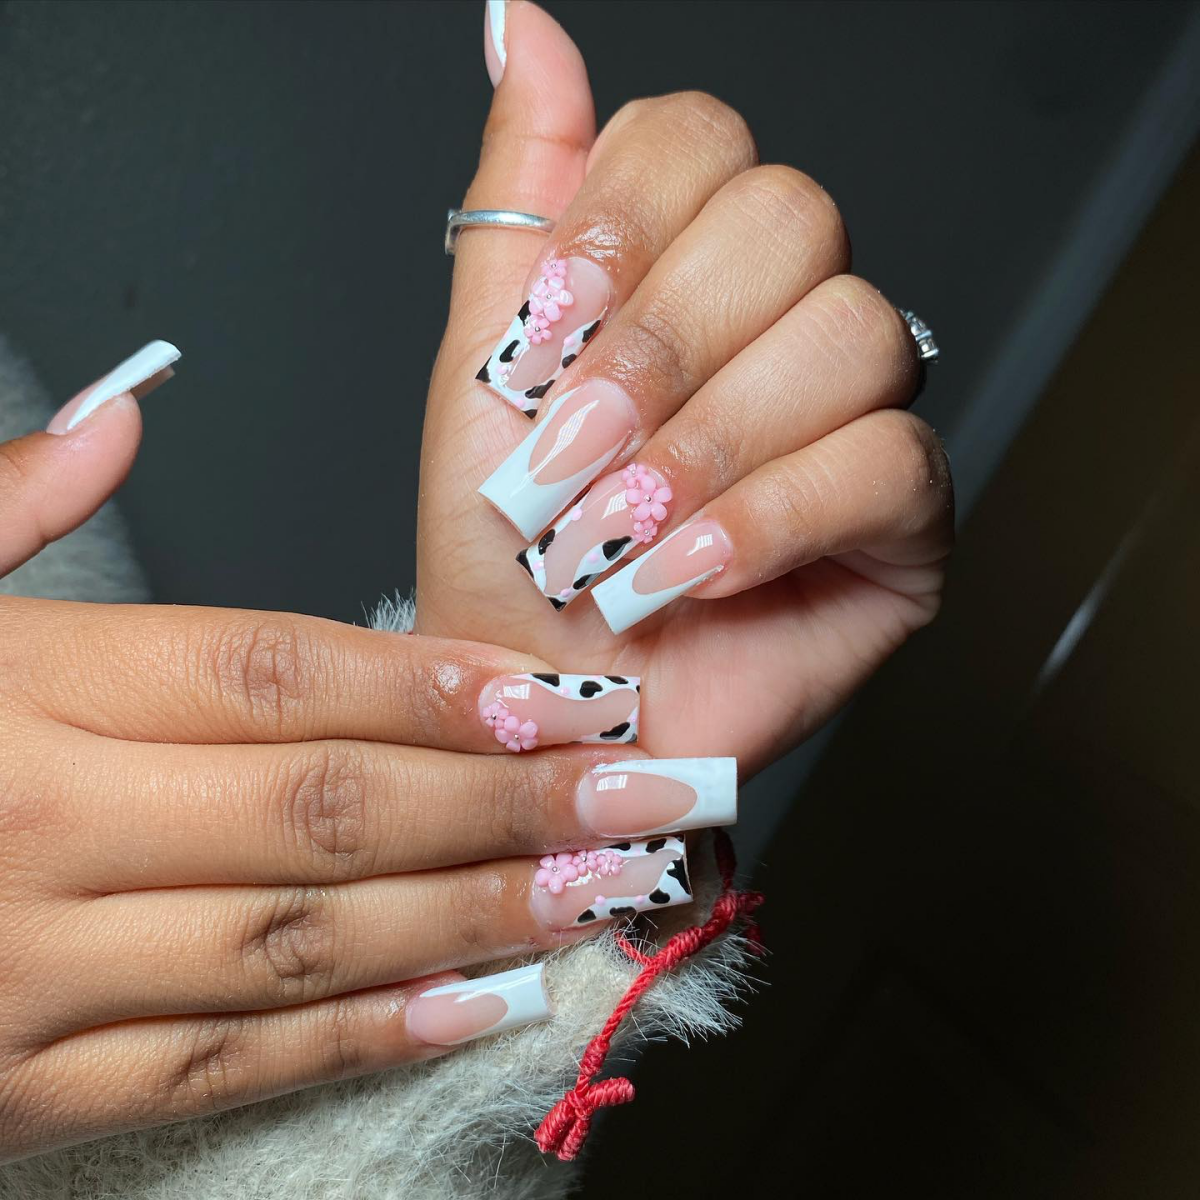 cow prink french manicure with pink flowers